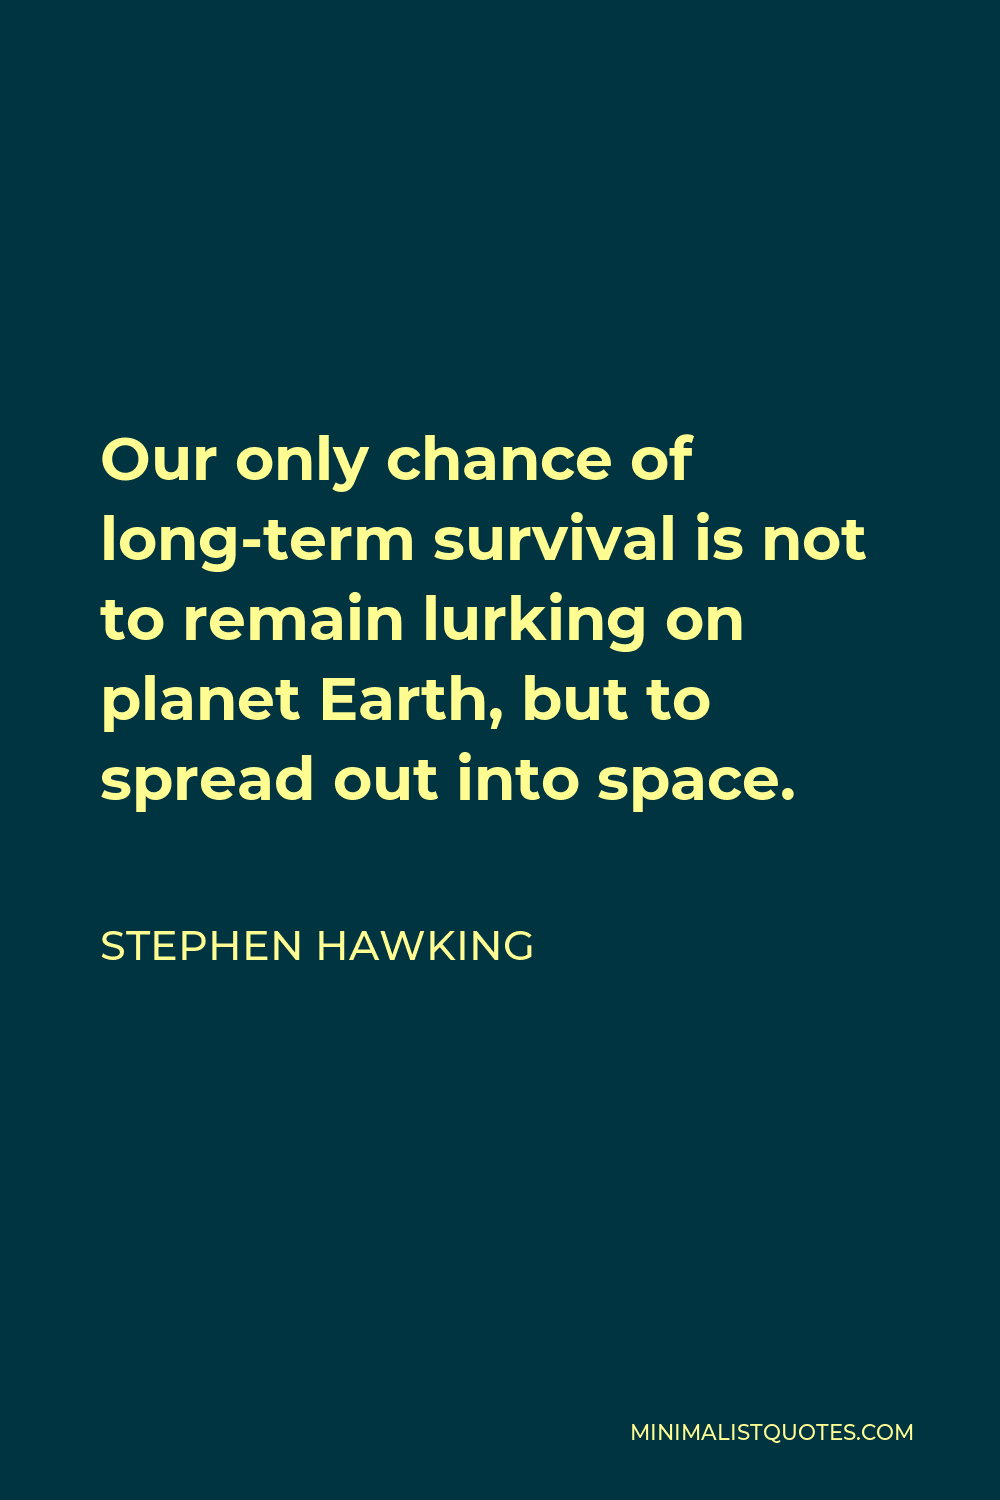 Stephen Hawking Quote - Our only chance of long-term survival is not to remain lurking on planet Earth, but to spread out into space.